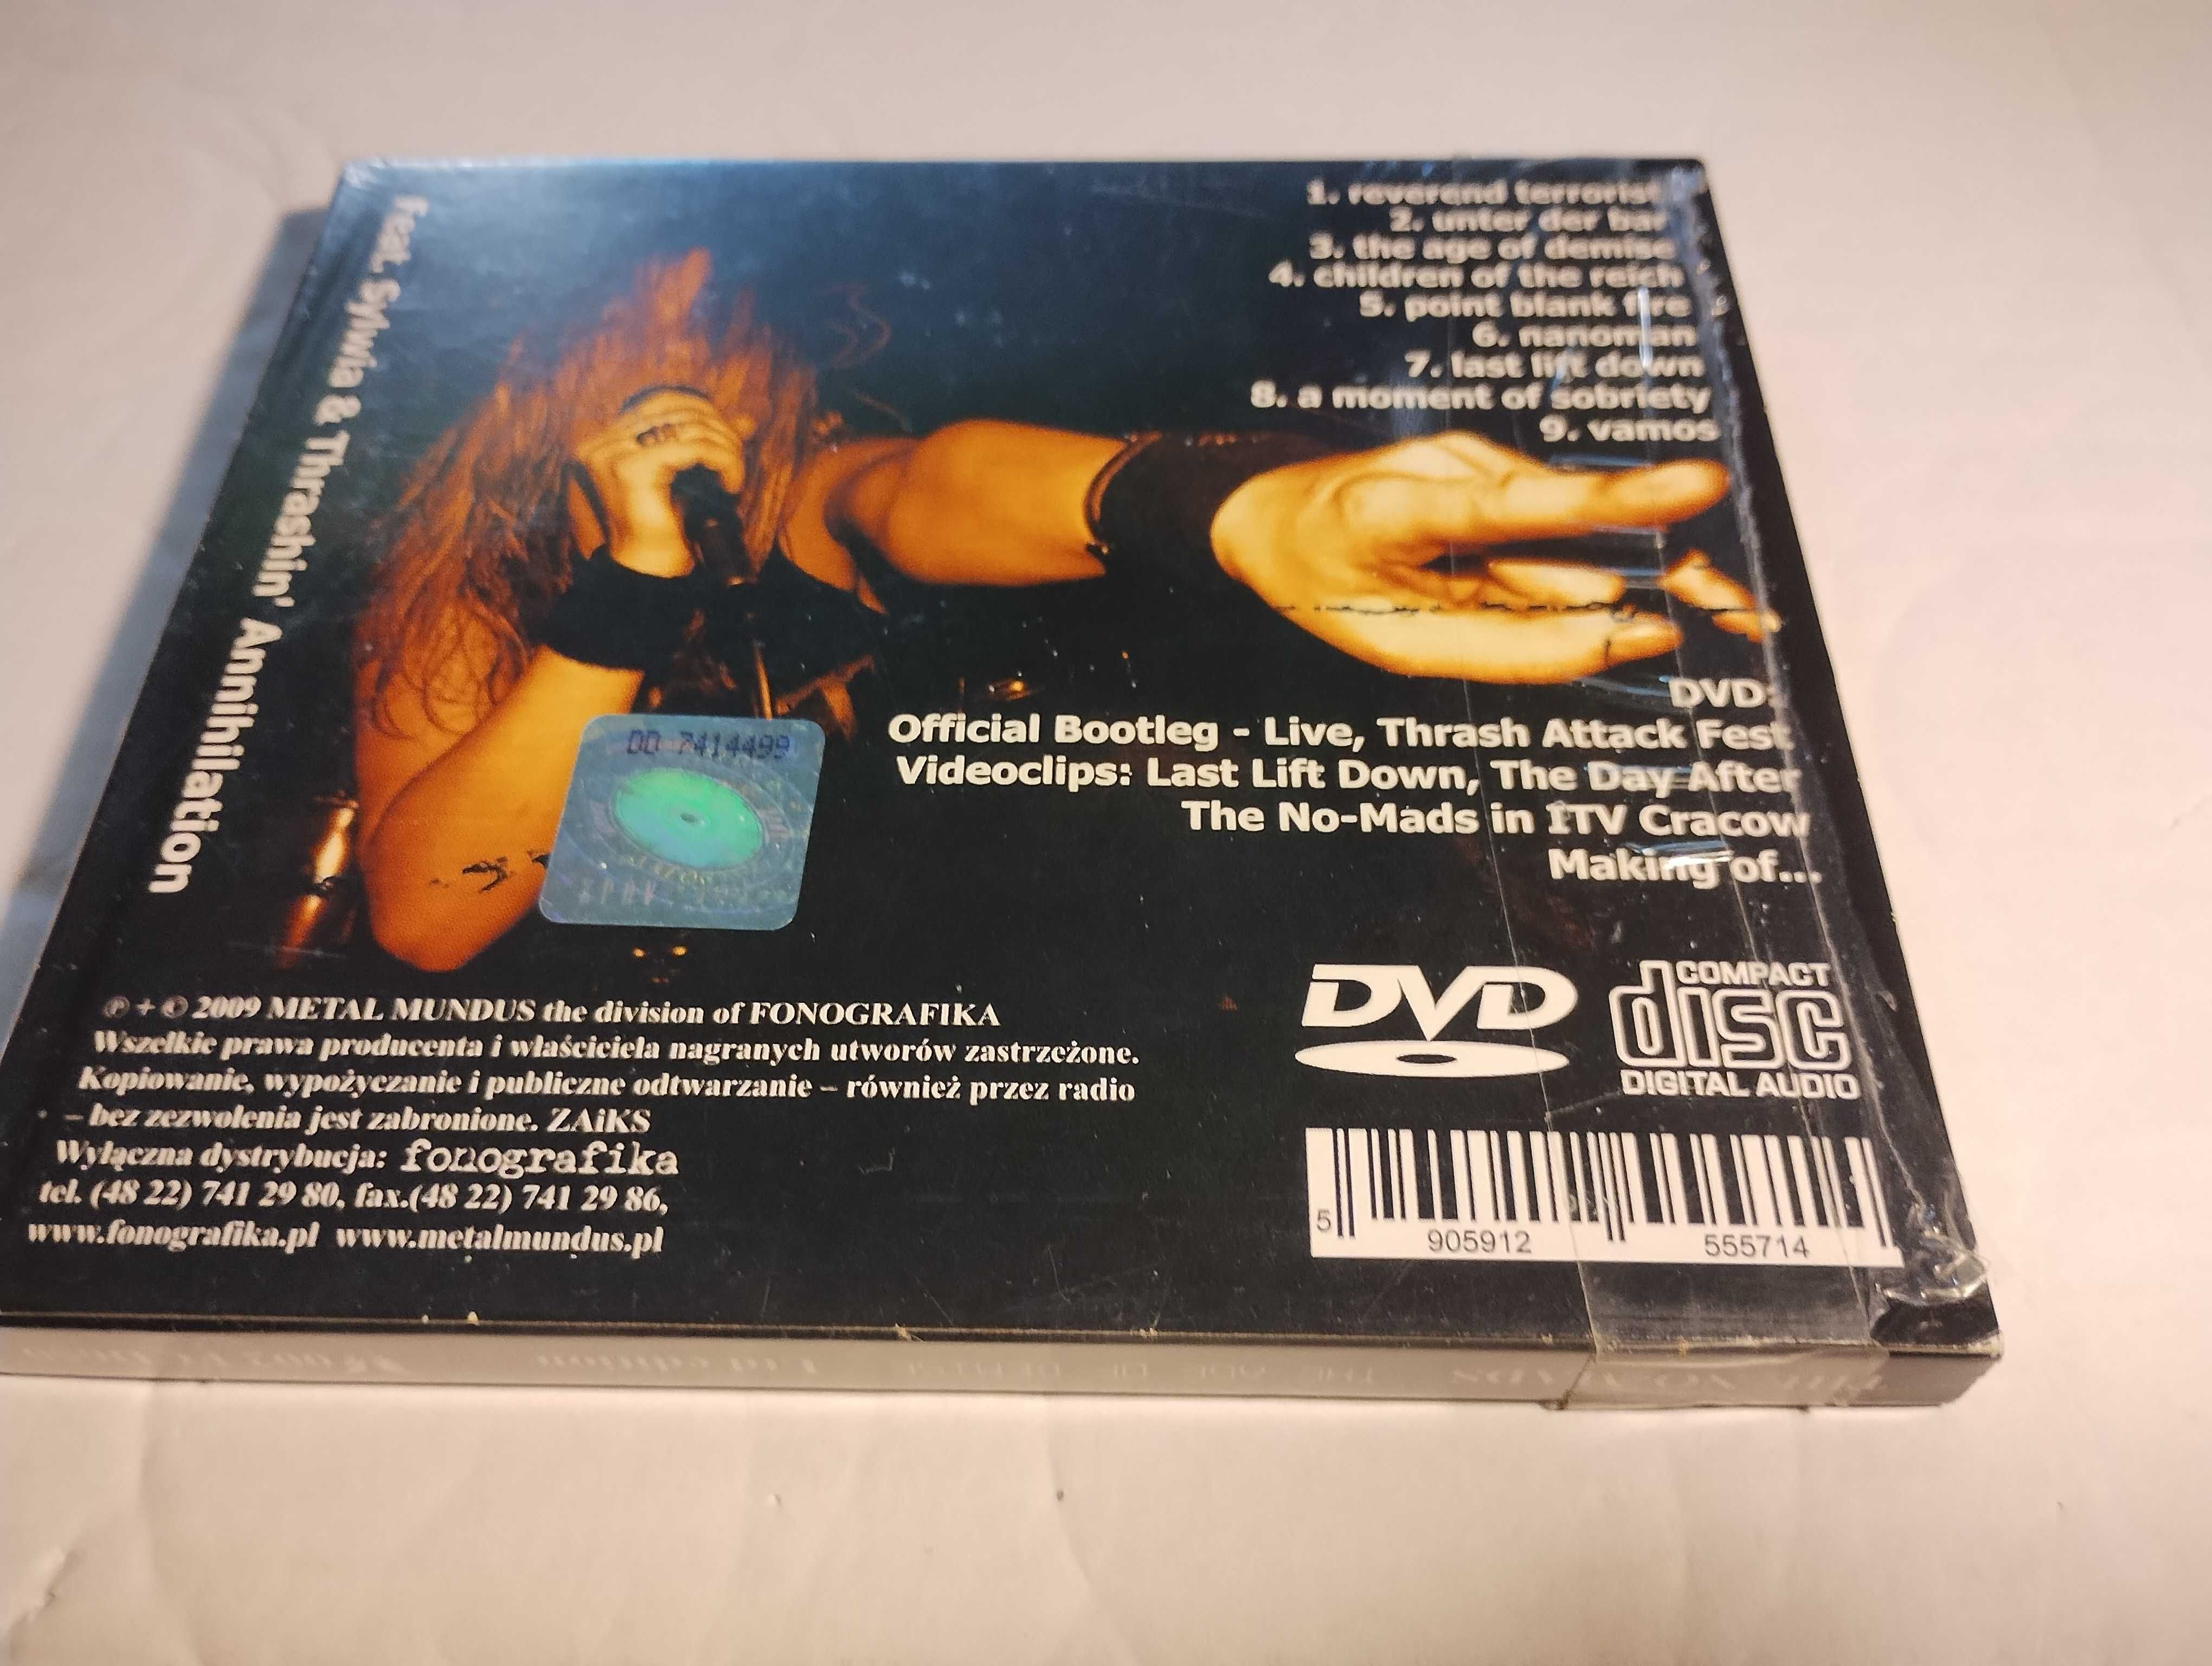 The No-Mads TheAge of Demise CD + DVD